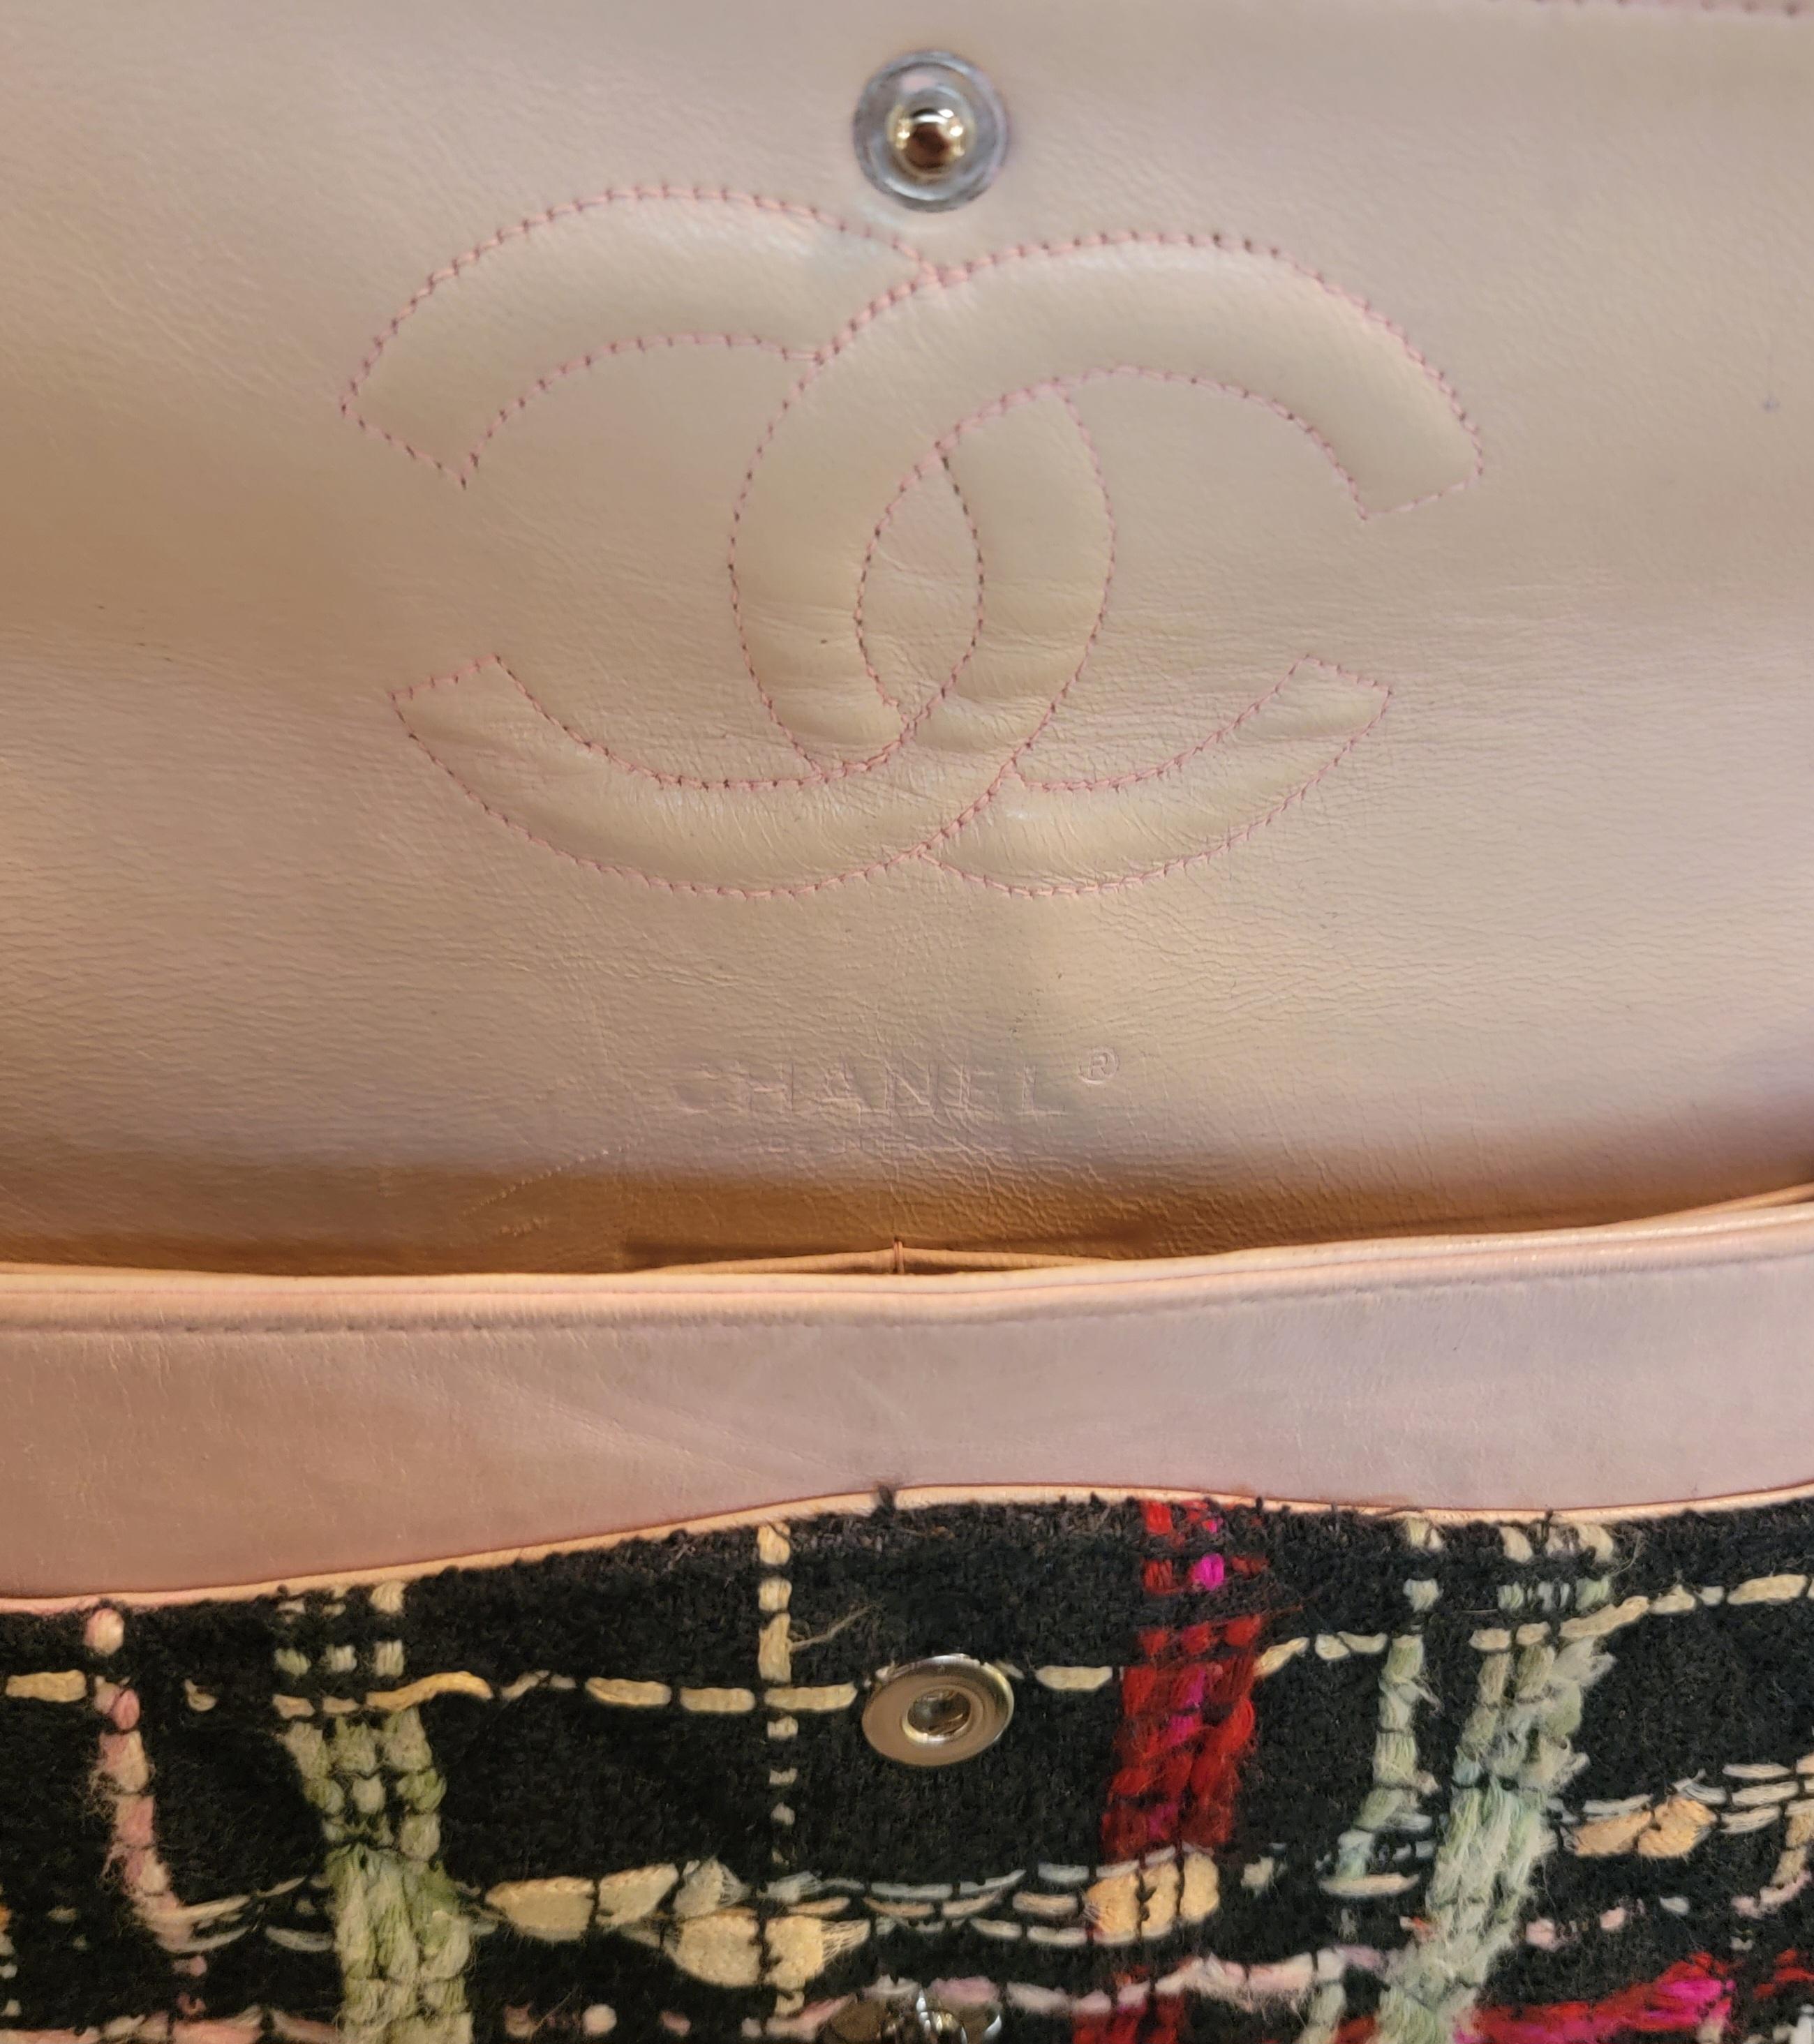 Auth Classic Chanel Runway Tweed Flap Bag For Sale 3